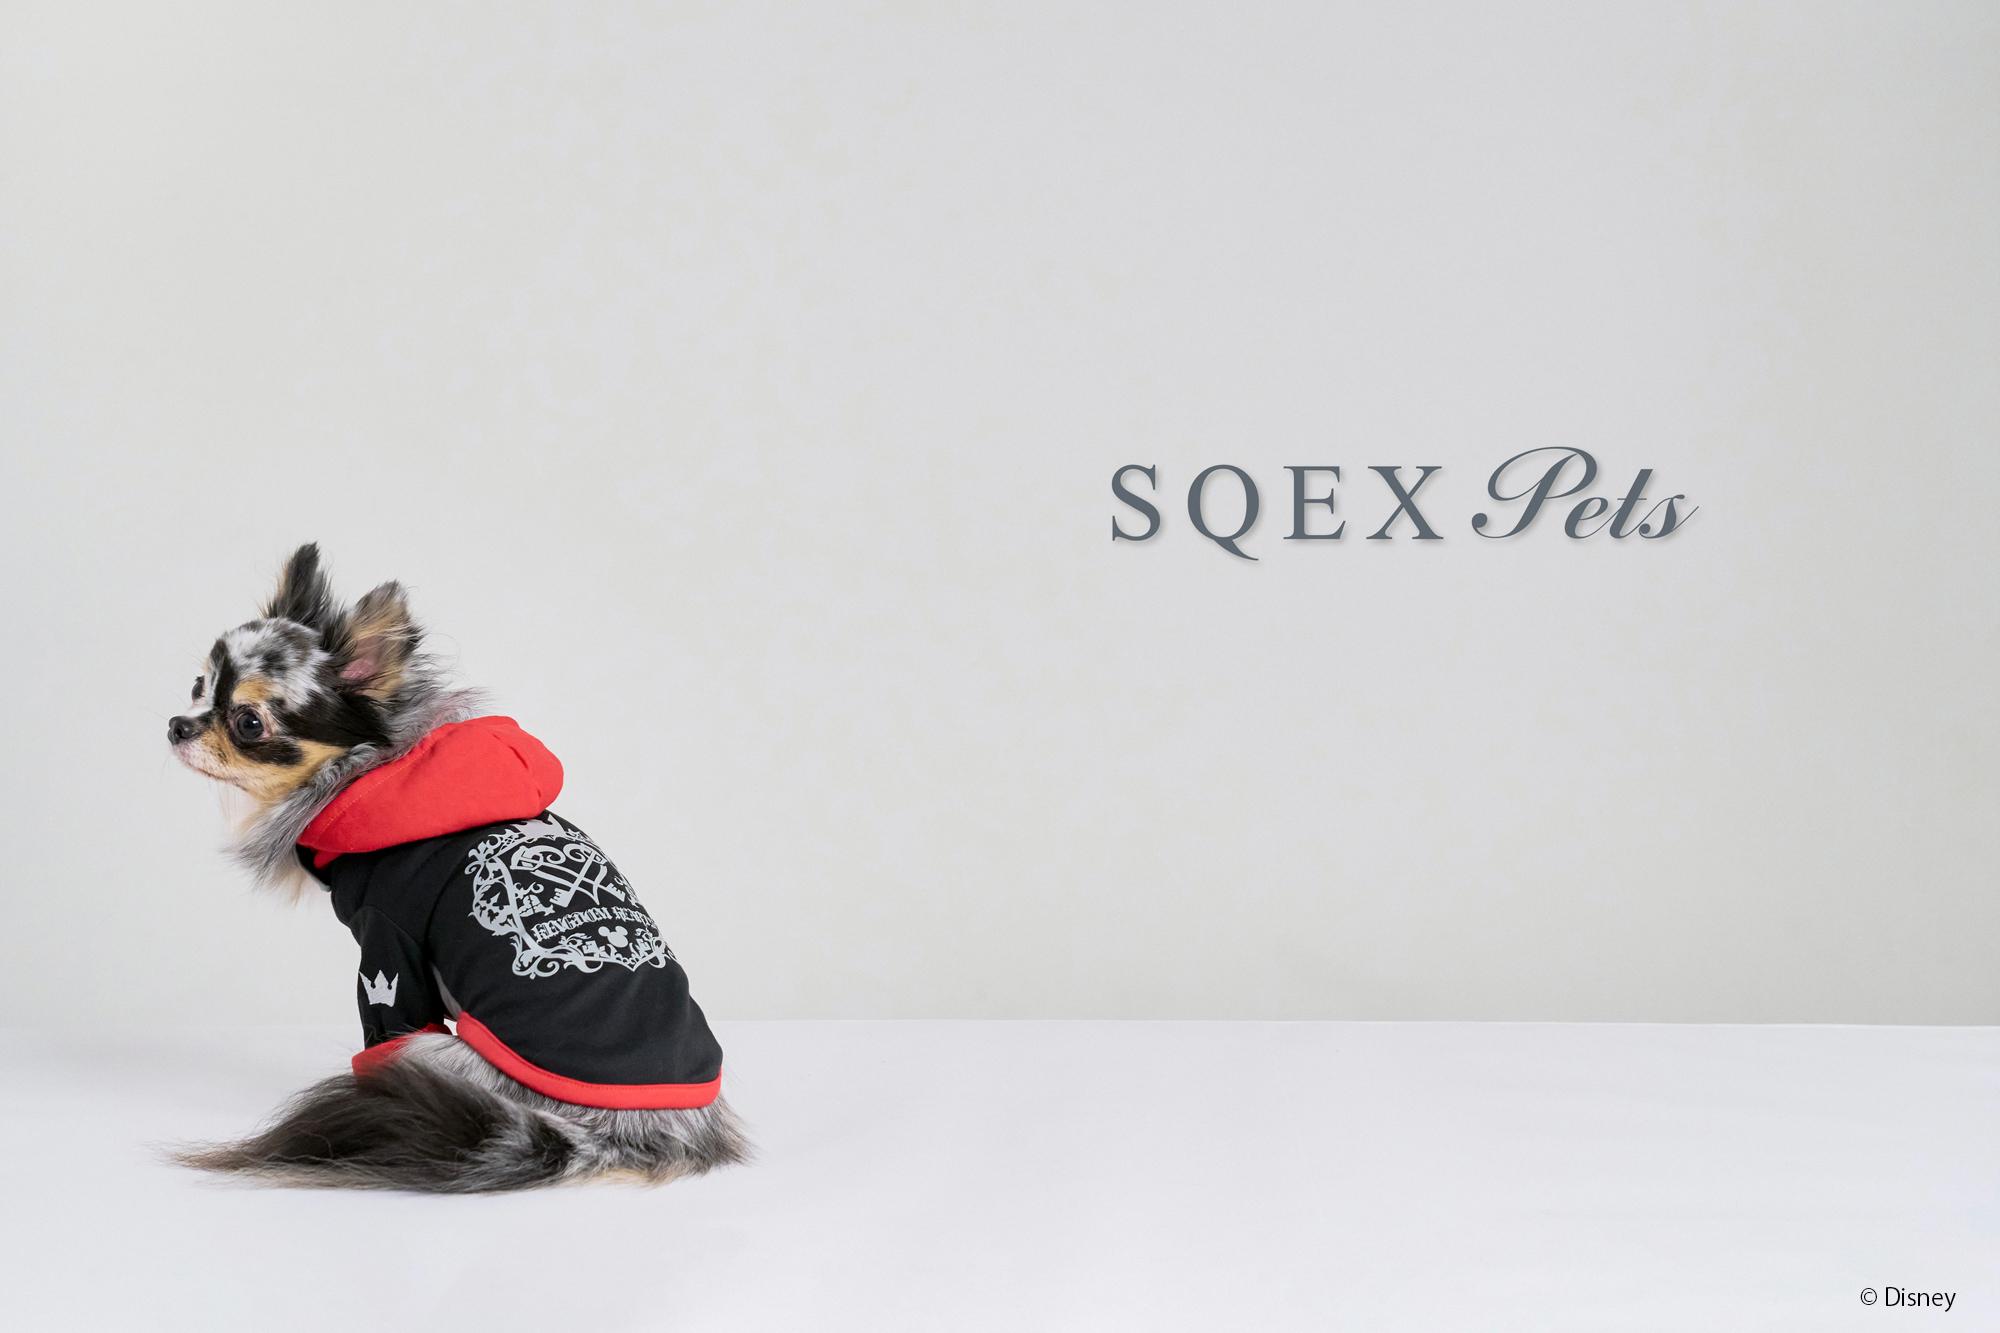 Square Enix launches new SQEX PETS brand featuring pet products based on Kingdom Hearts, Final Fantasy and Dragon Quest – Kingdom Hearts News